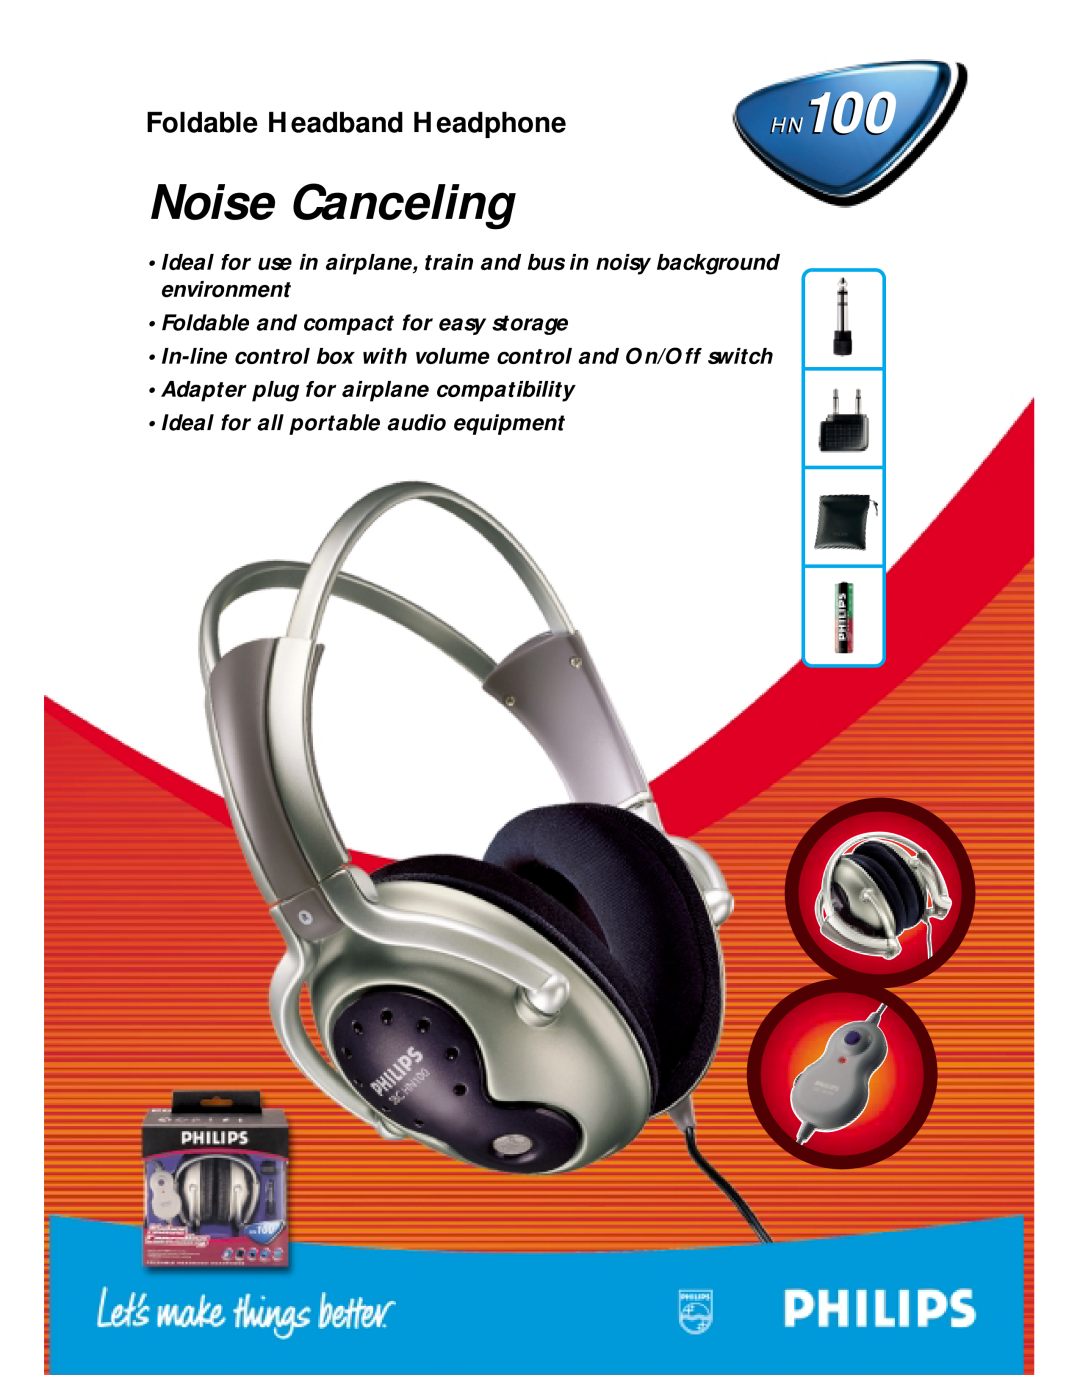 Philips HN100 manual Noise Canceling, Foldable Headband Headphone, Foldable and compact for easy storage 